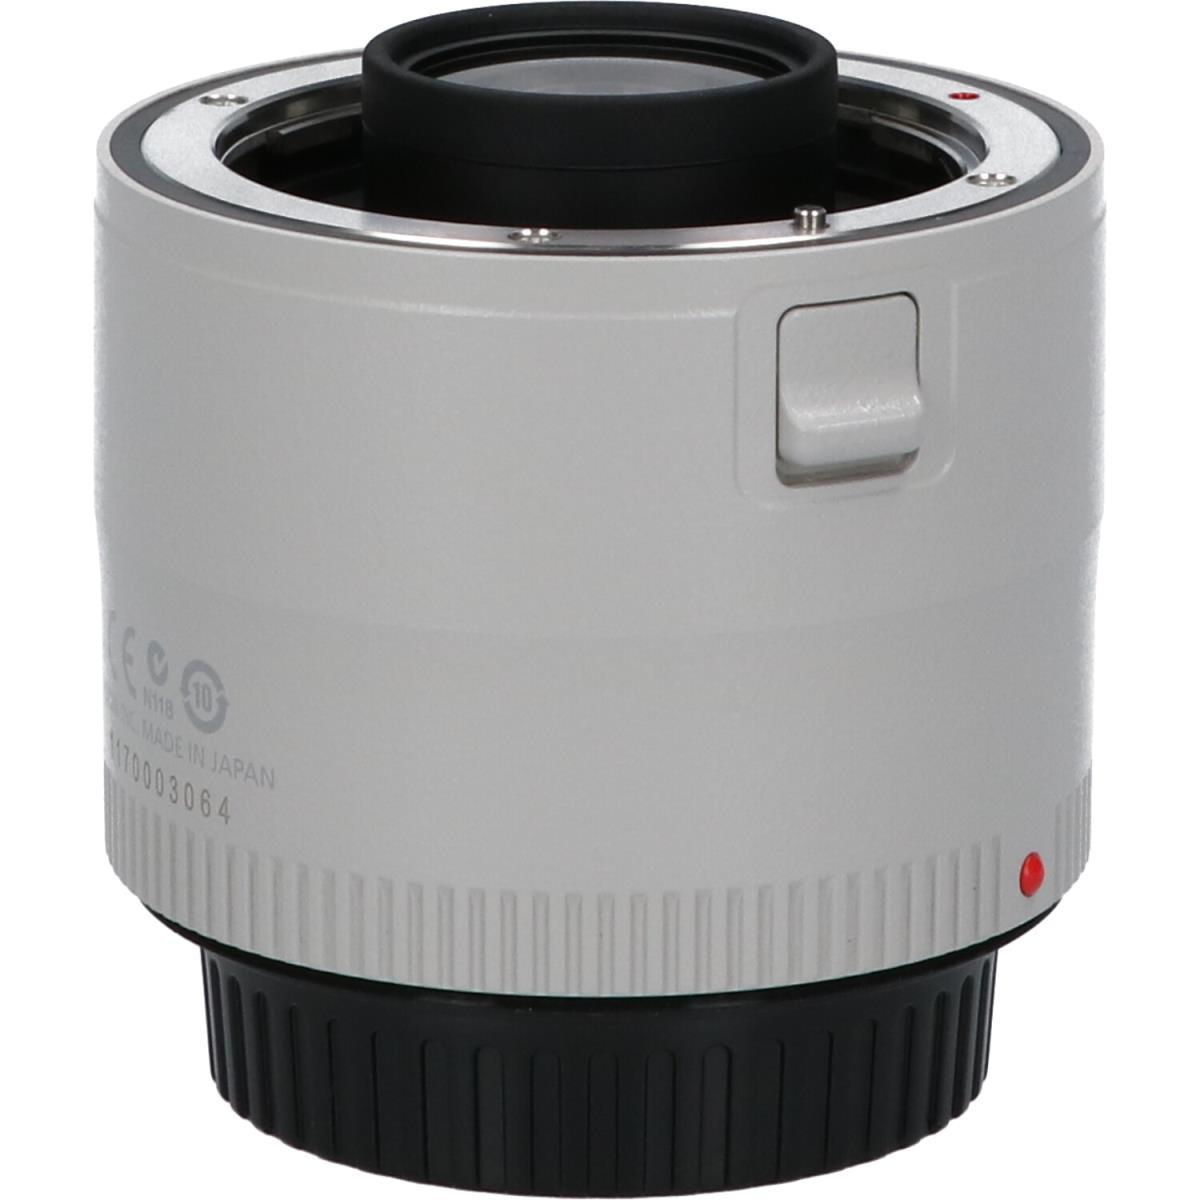 CANON EF2XIII